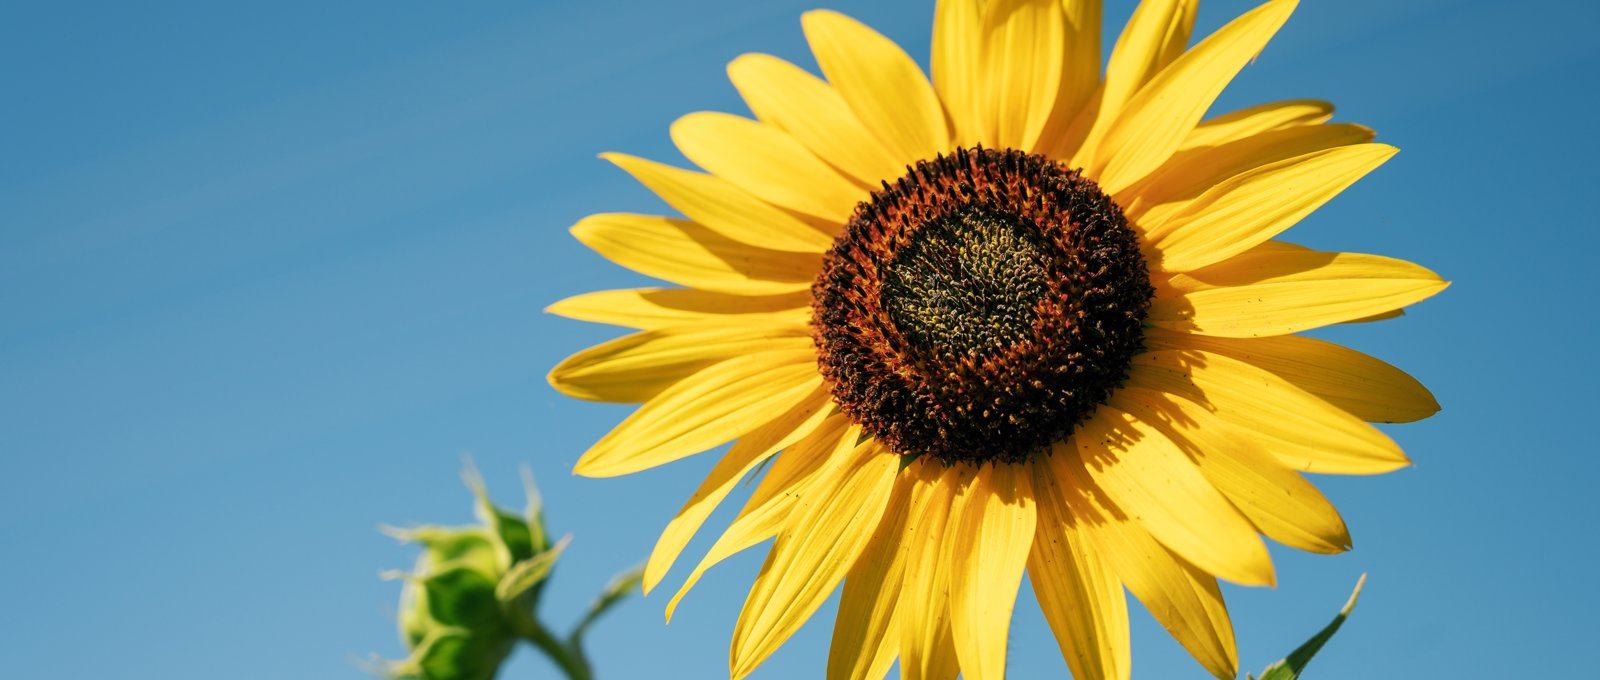 Close-up photo of the top of a sunflower with a blue sky background